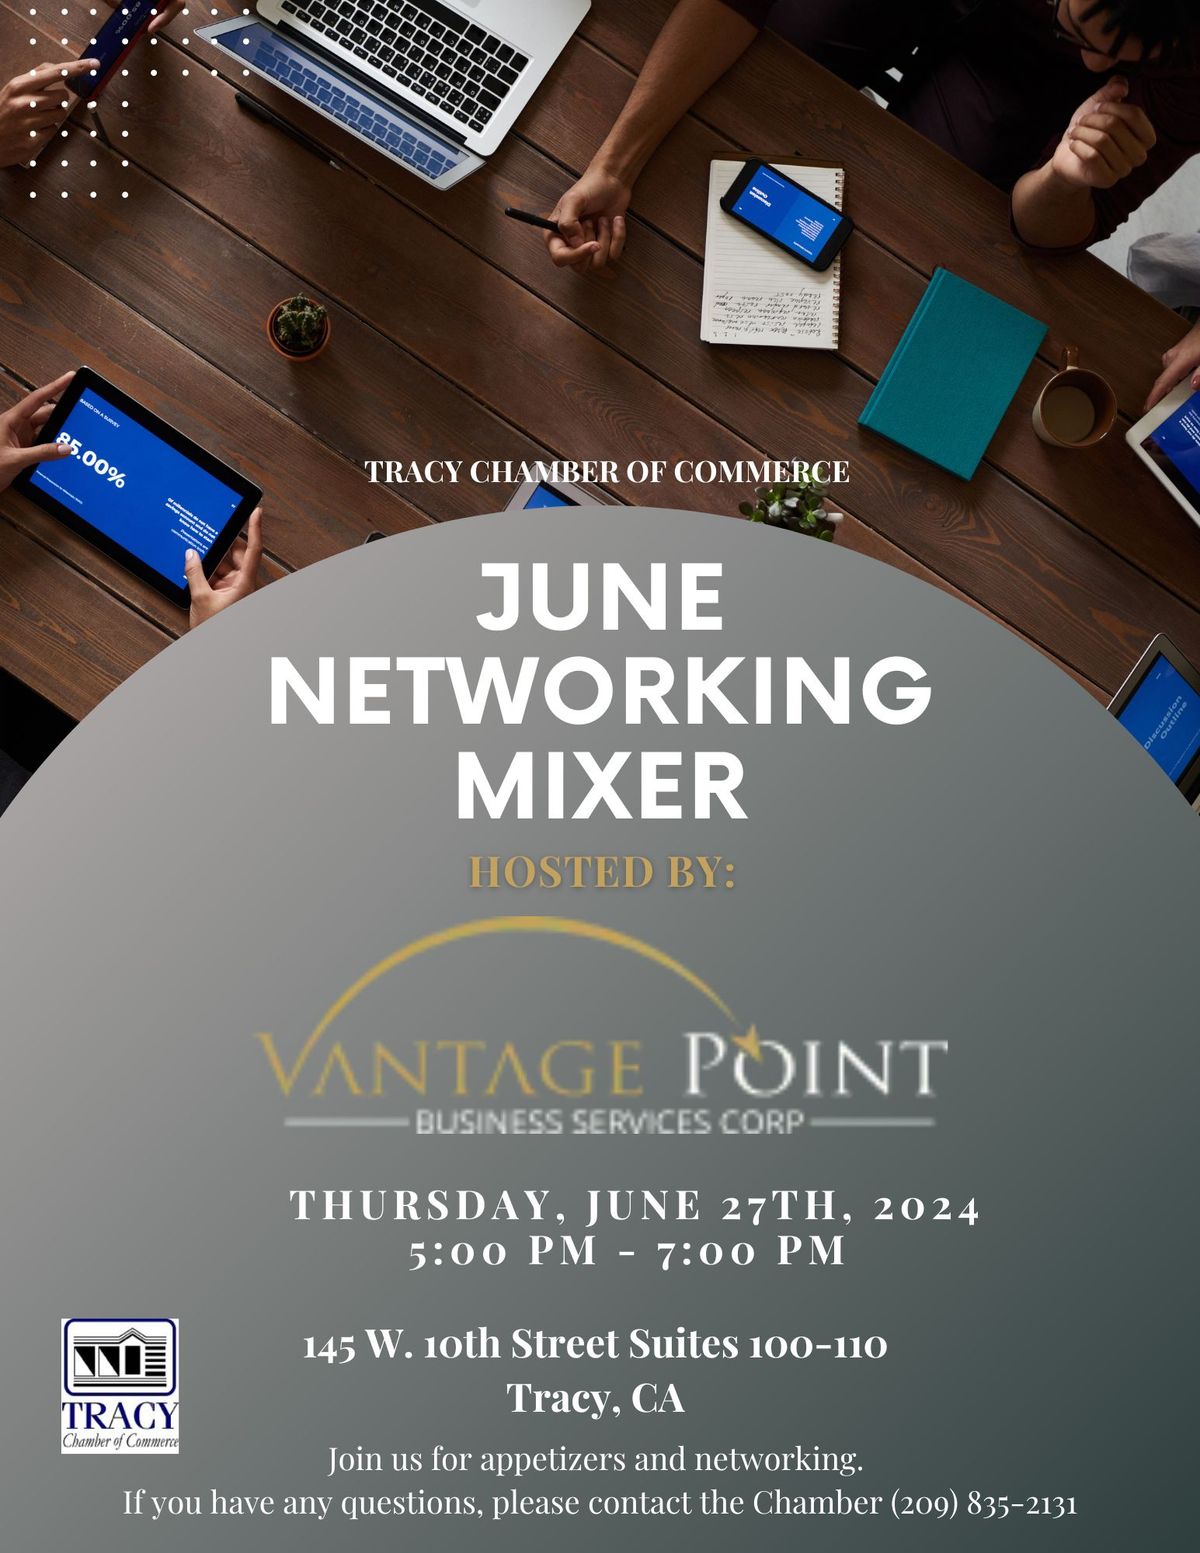 June Networking Mixer Hosted By Vantage Point Business Services